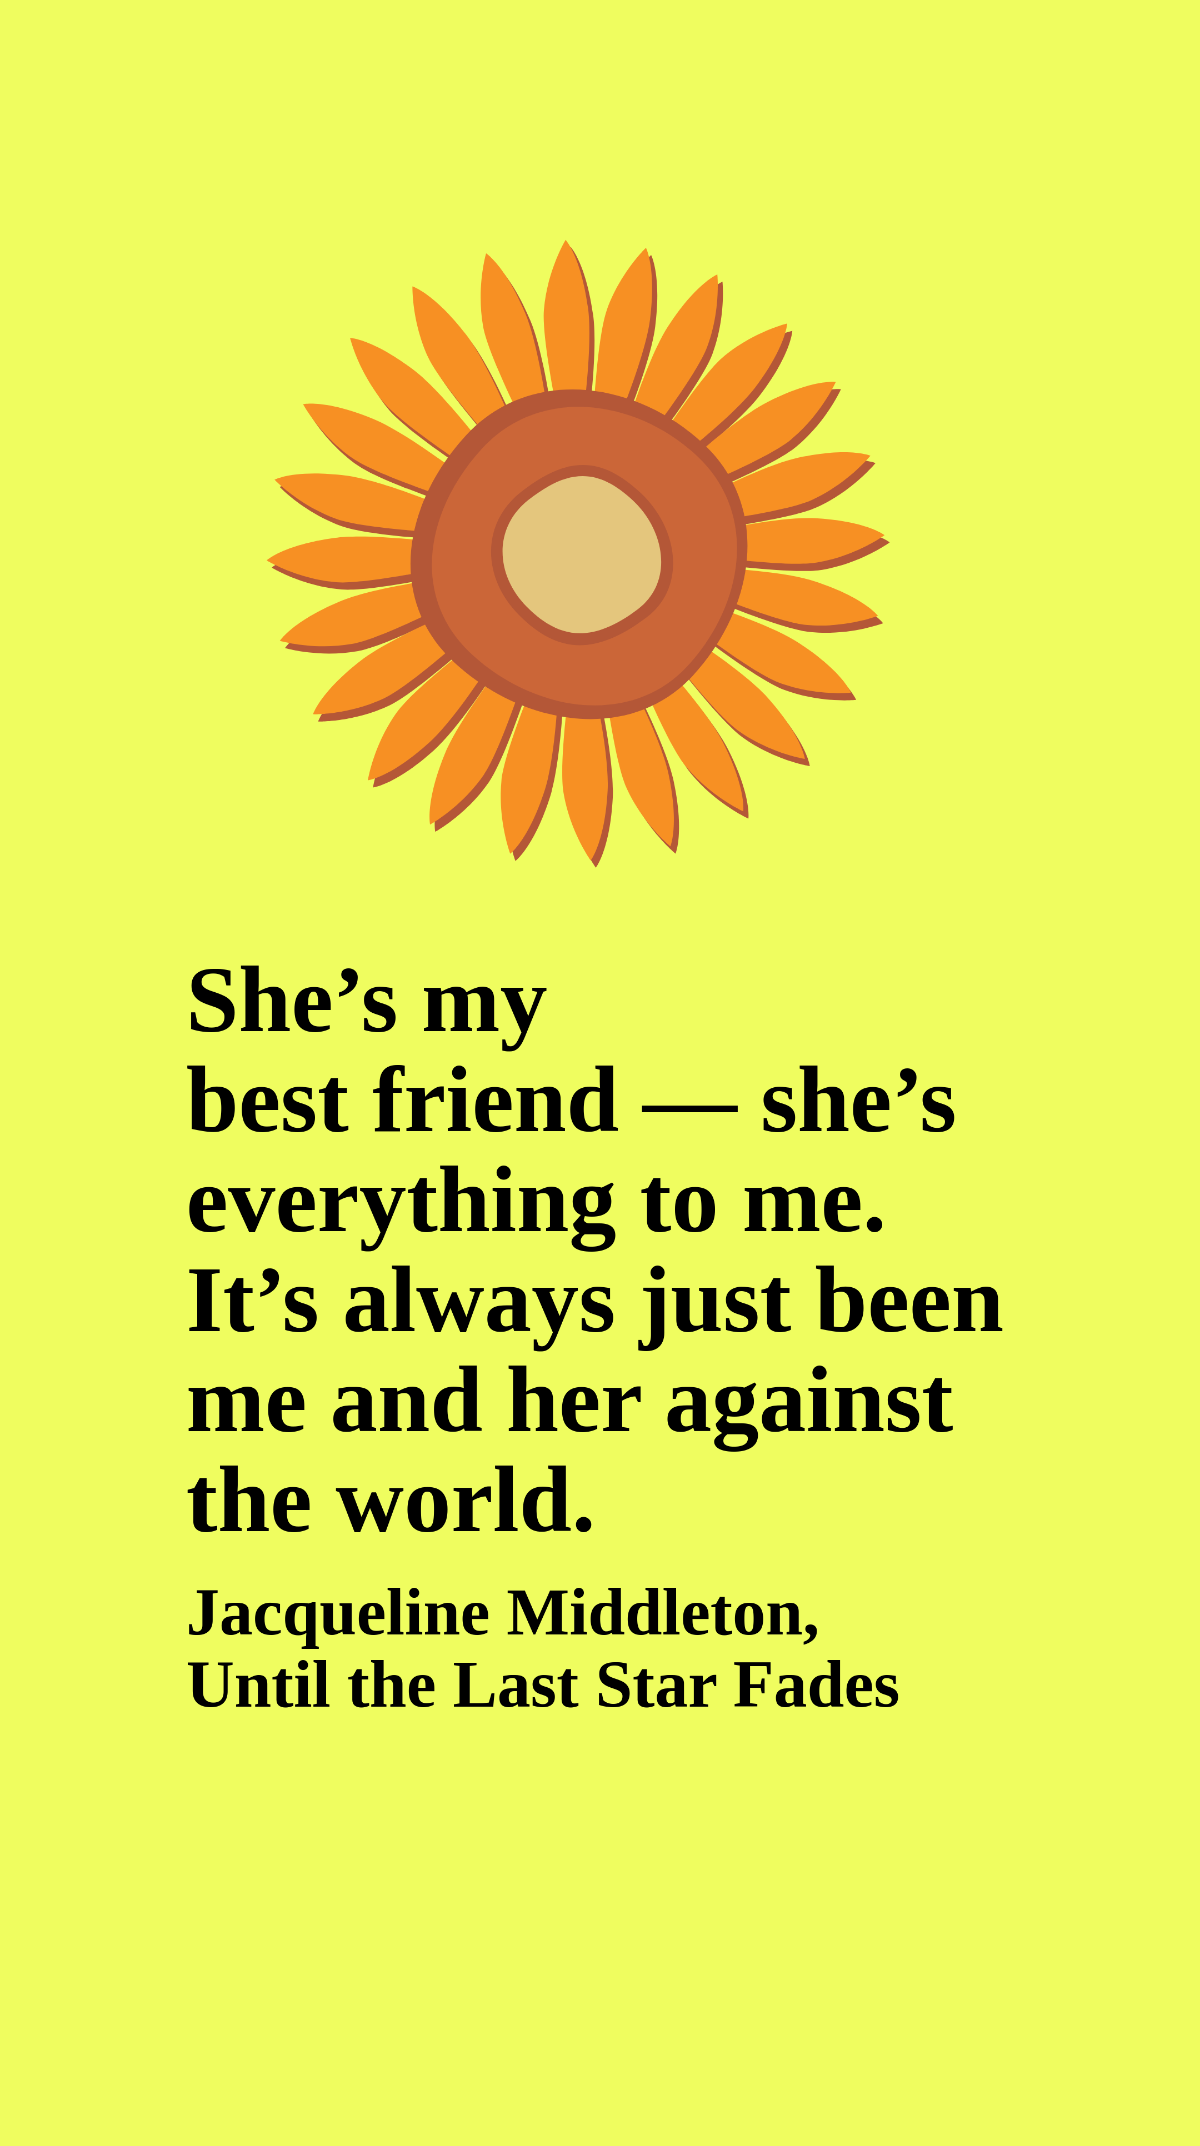 Jacqueline Middleton, Until the Last Star Fades - She’s my best friend — she’s everything to me. It’s always just been me and her against the world. Template